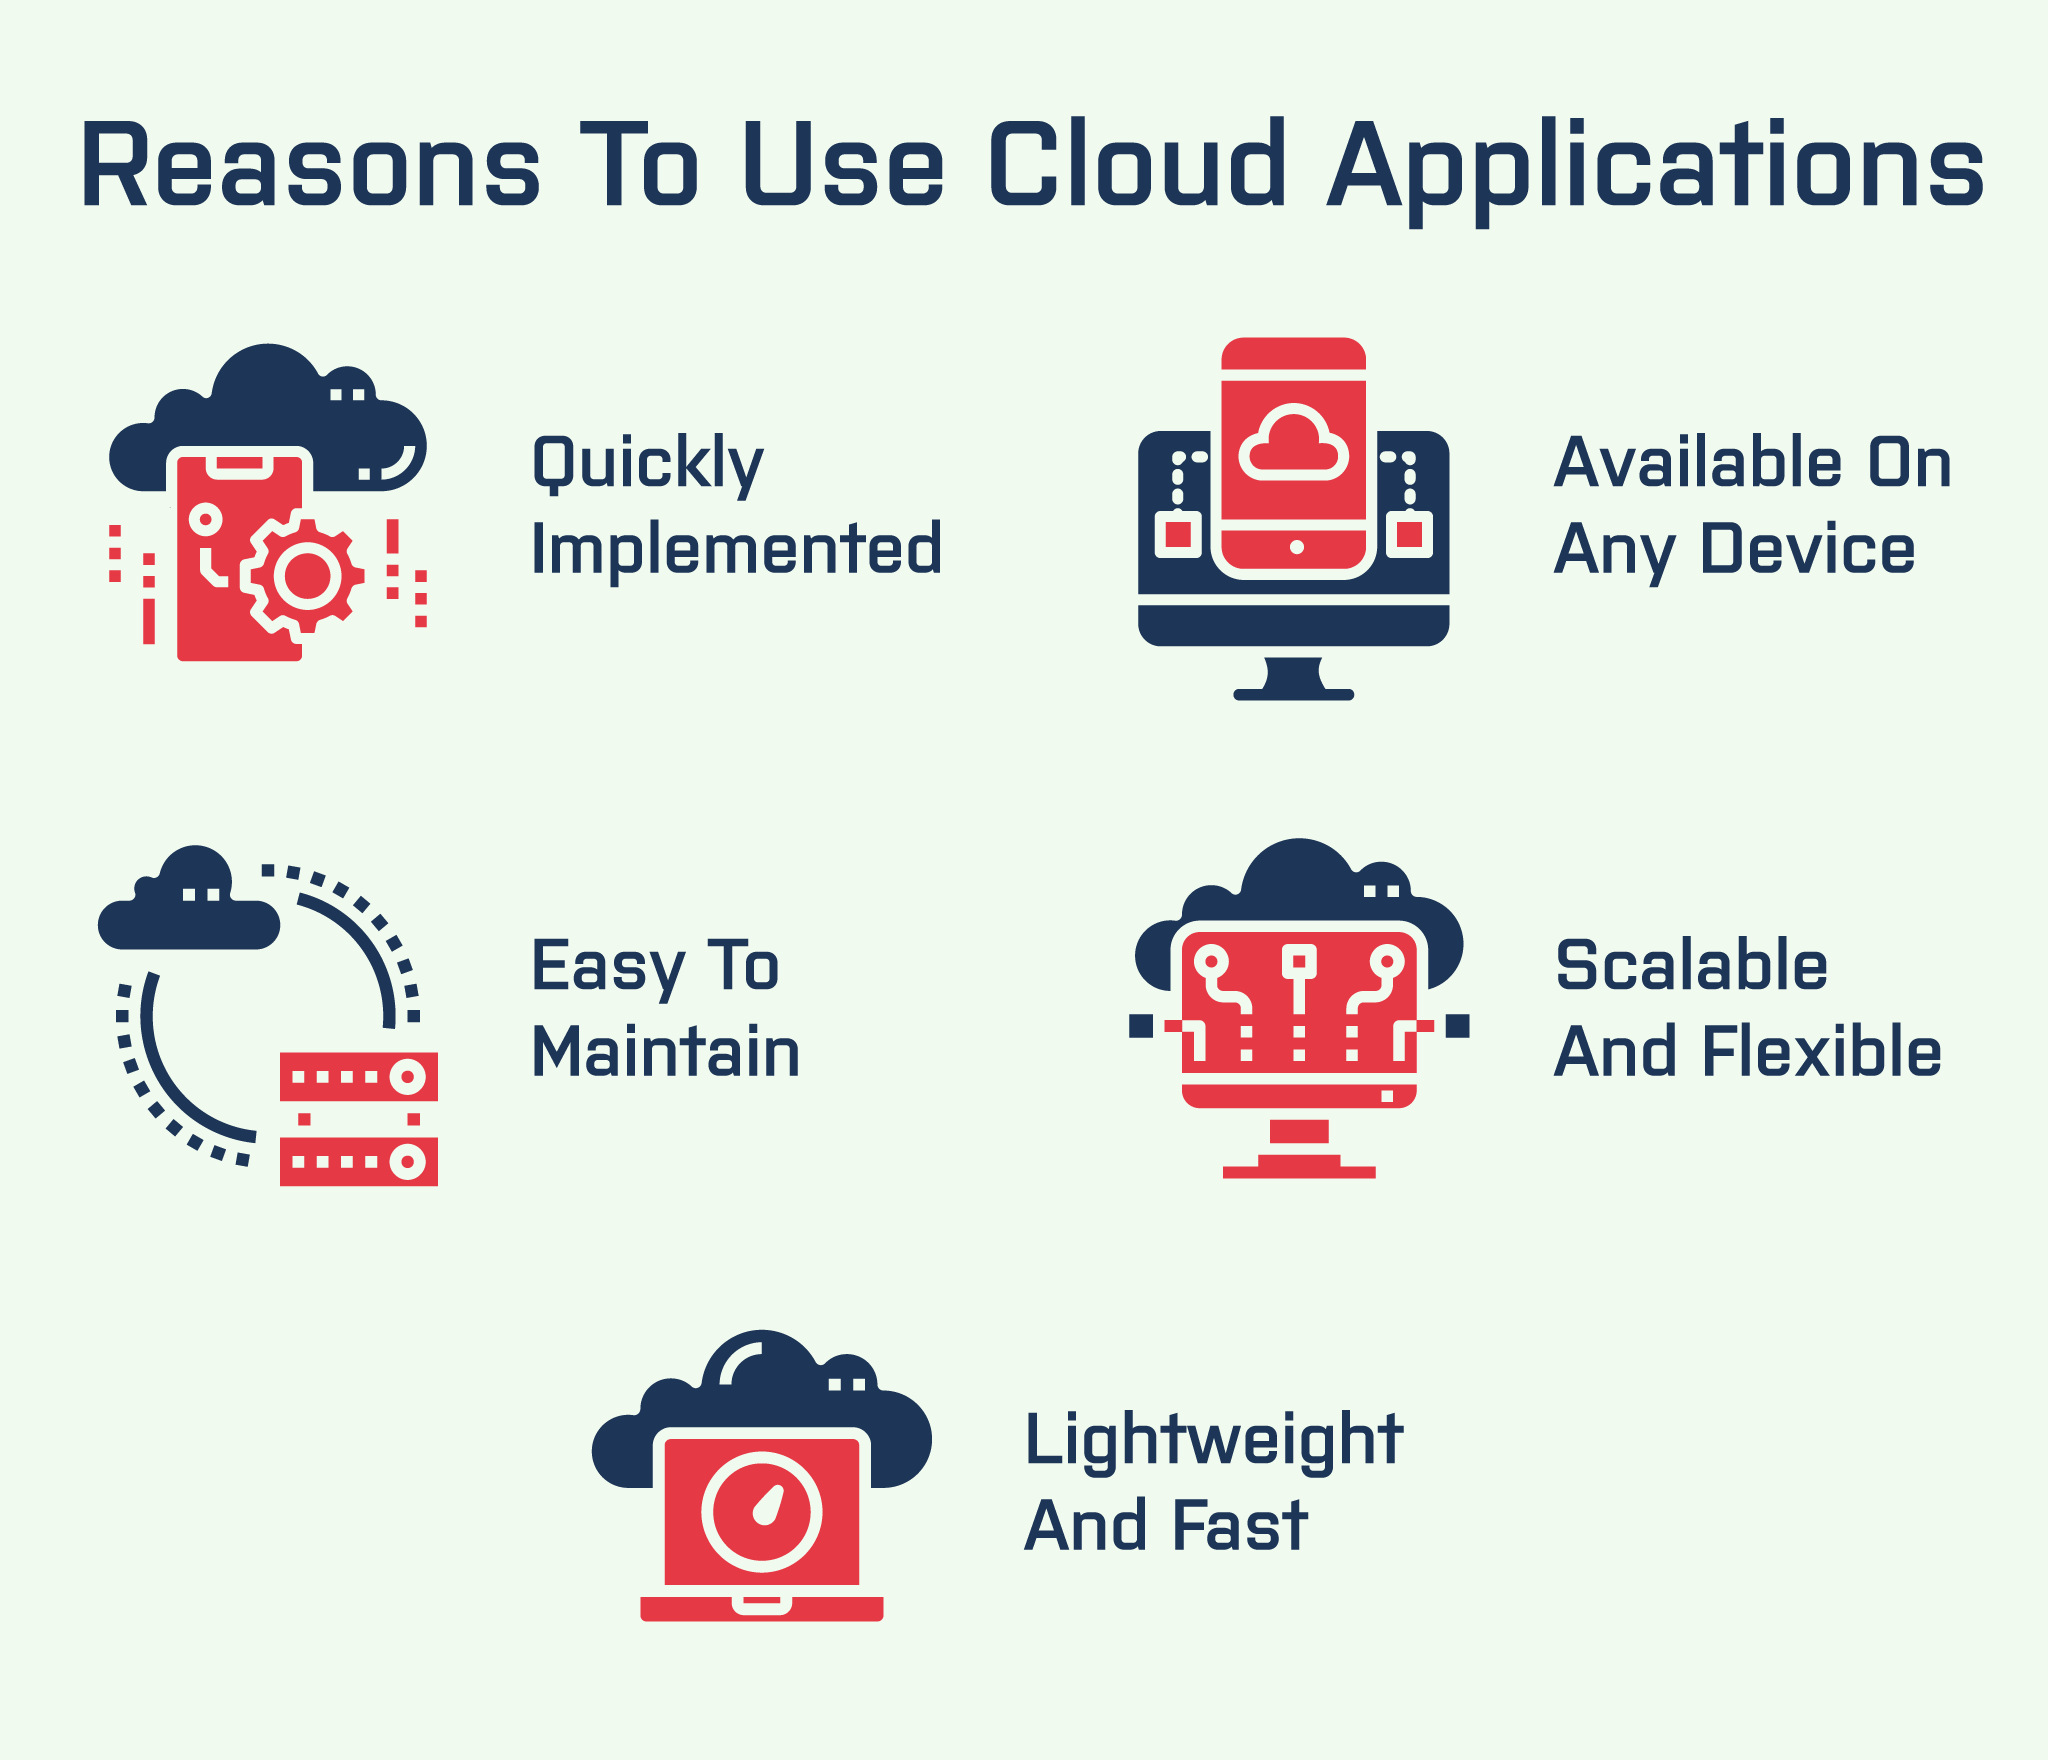 Reasons to use cloud applications